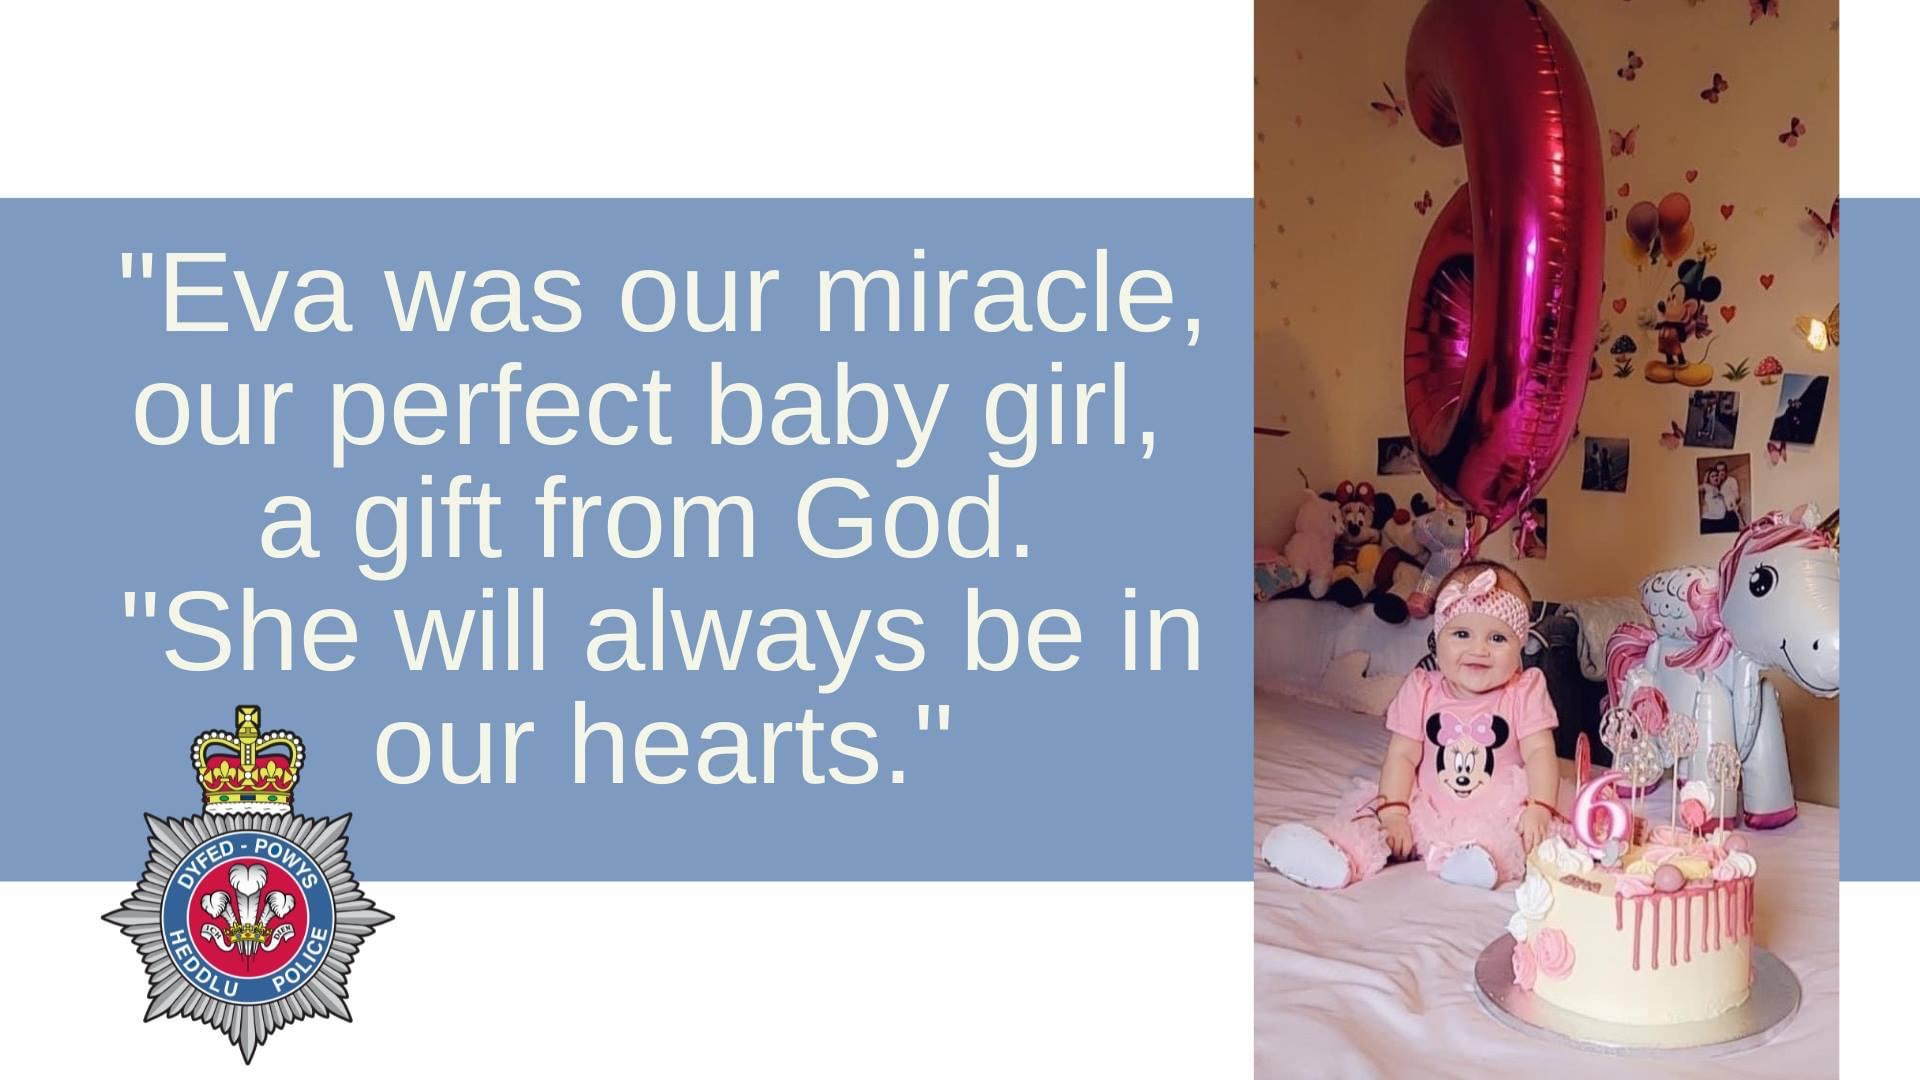 NEWS | Parents’ tribute to ‘perfect baby girl’ following fatal collision